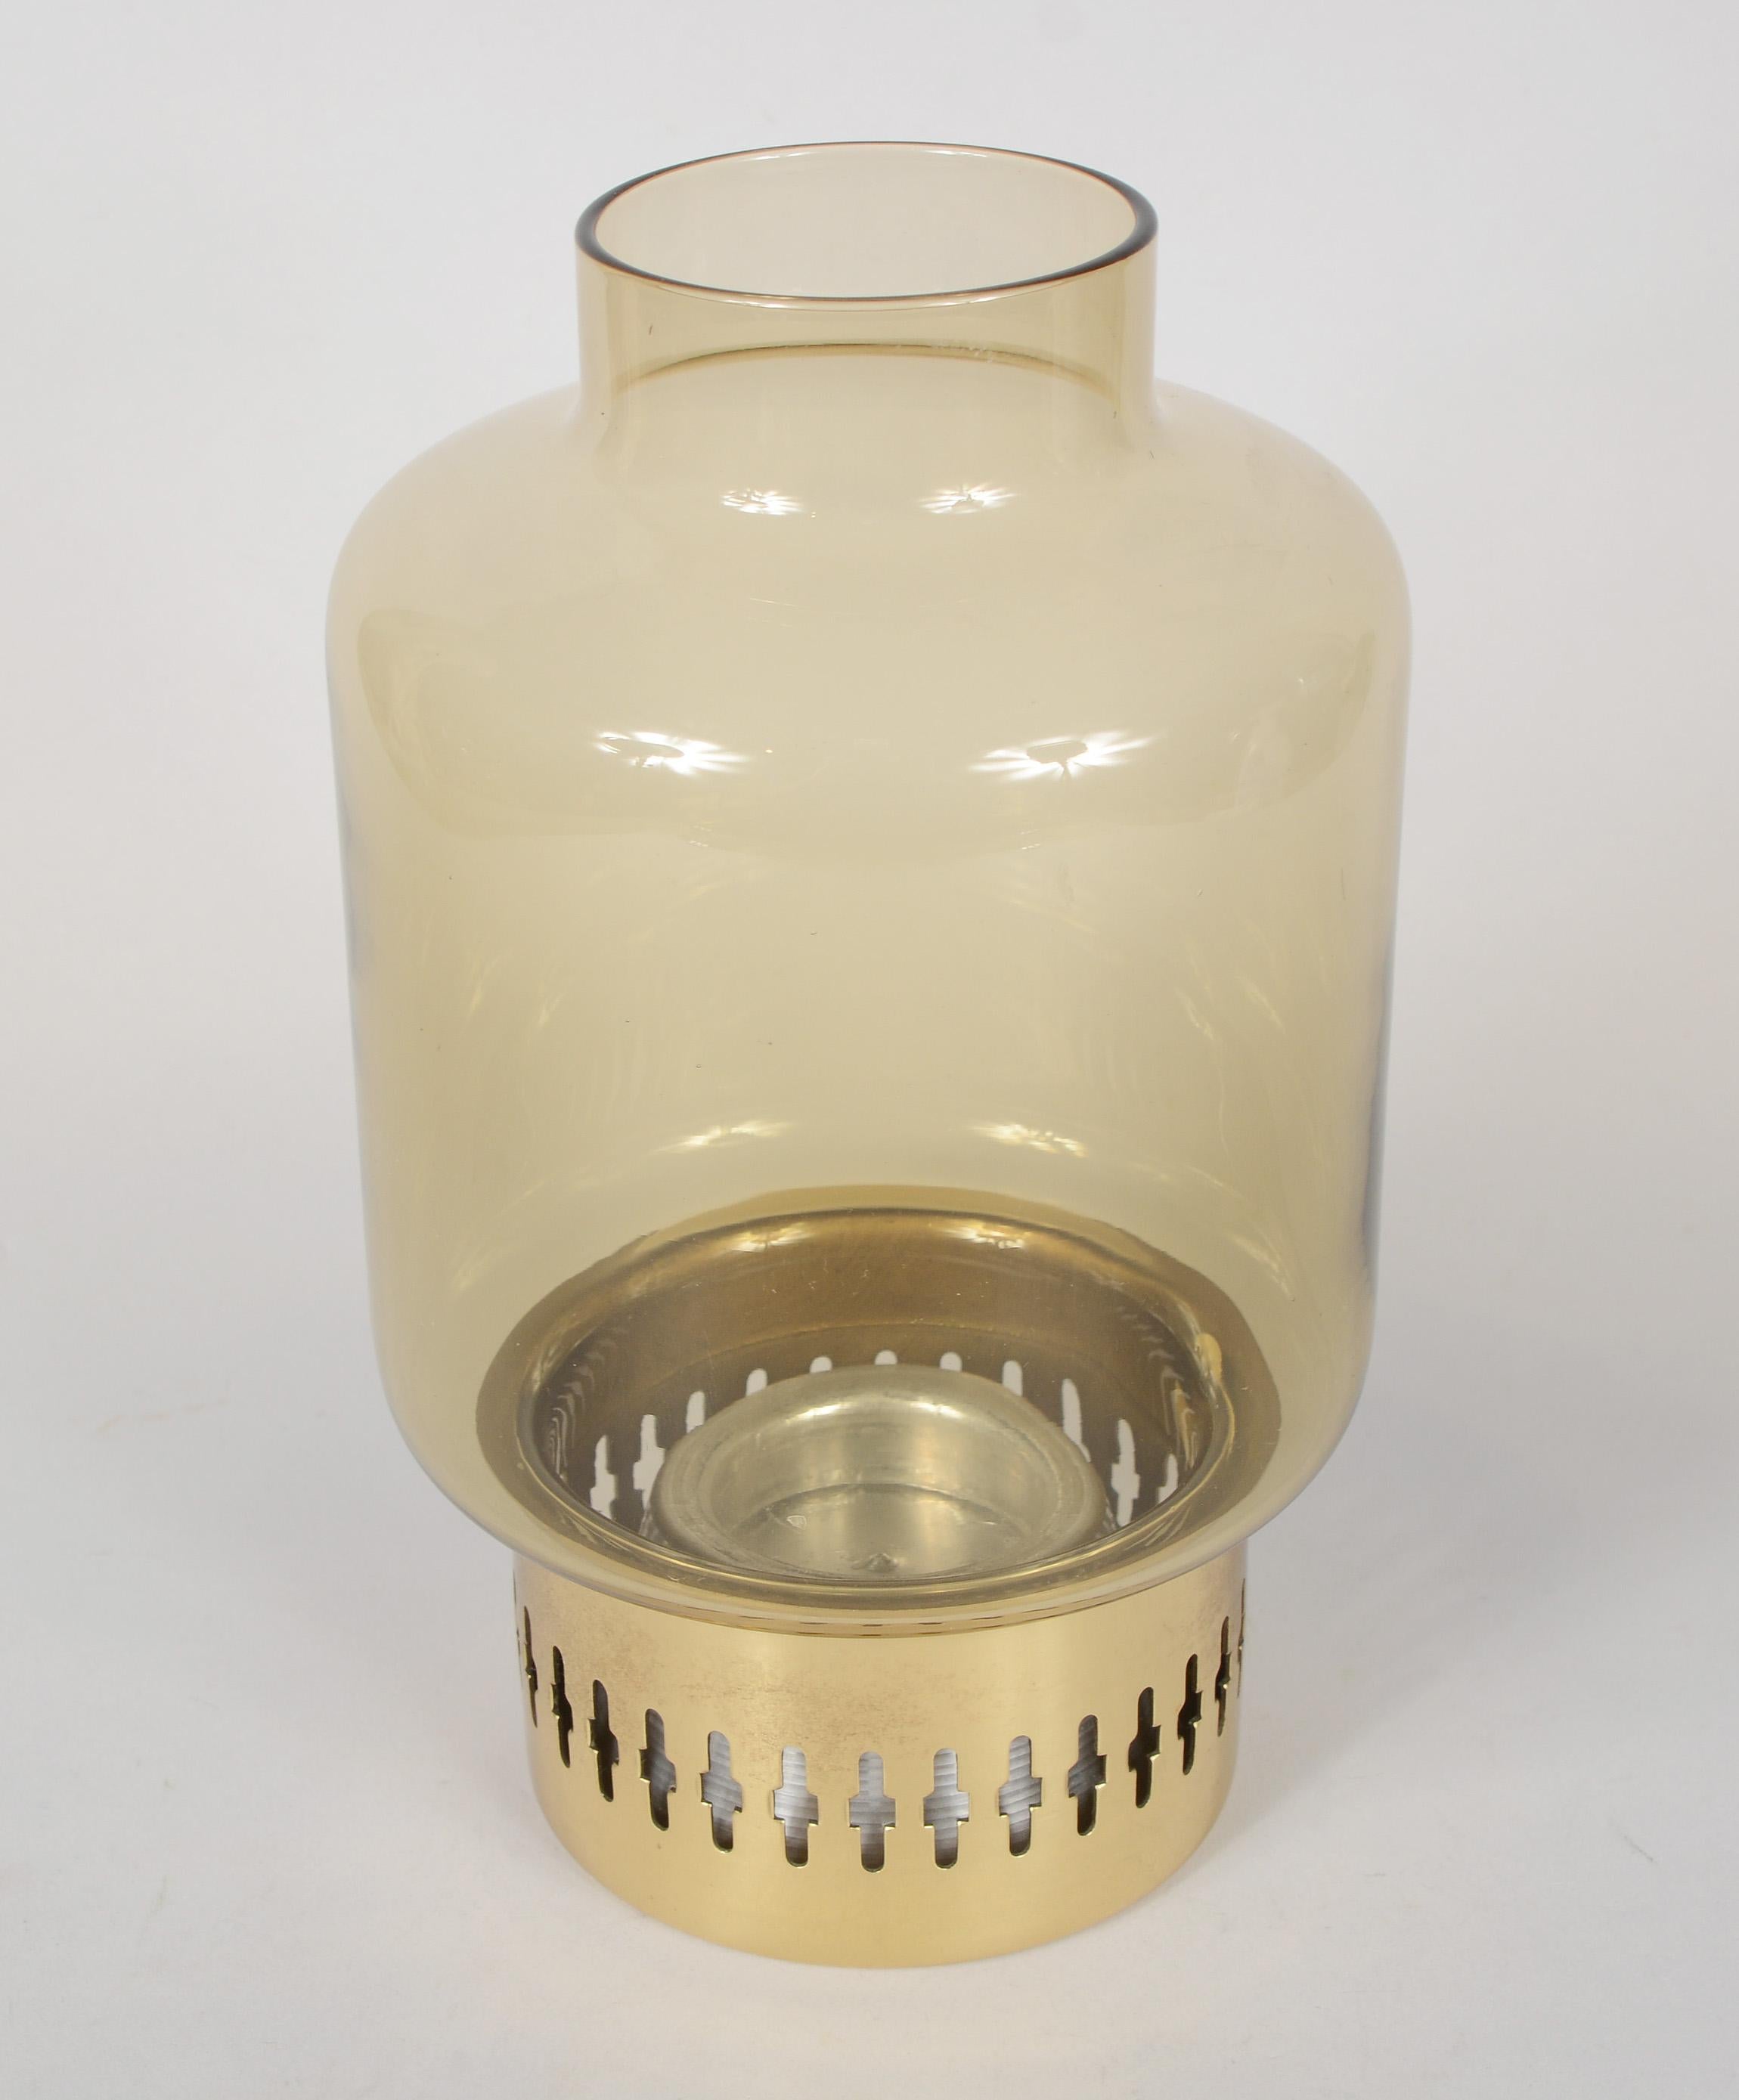 Brass and glass candleholder designed by Hans-Agne Jakobsson. This was made in Sweden by AB Markaryd. This candle holder has a warm smoke colored shade. There is a small dent on the underside of the bottom that is not visible when the holder is